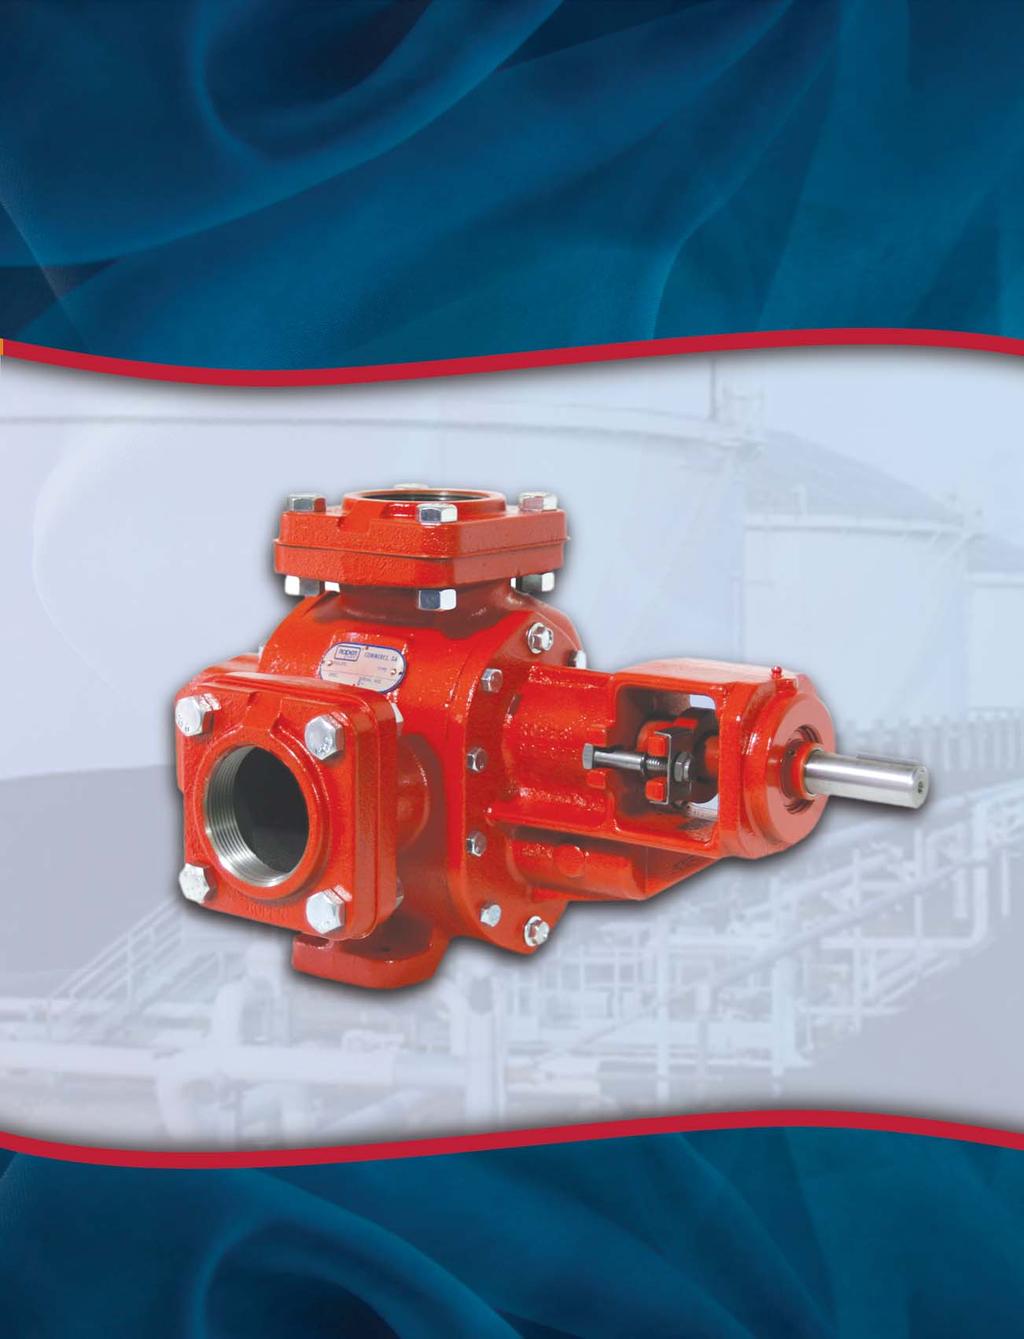 THE LEADING FORCE behind liquids since 187 300 Series Heavy Duty Pumps General Purpose Pumps for Mixing, Blending,